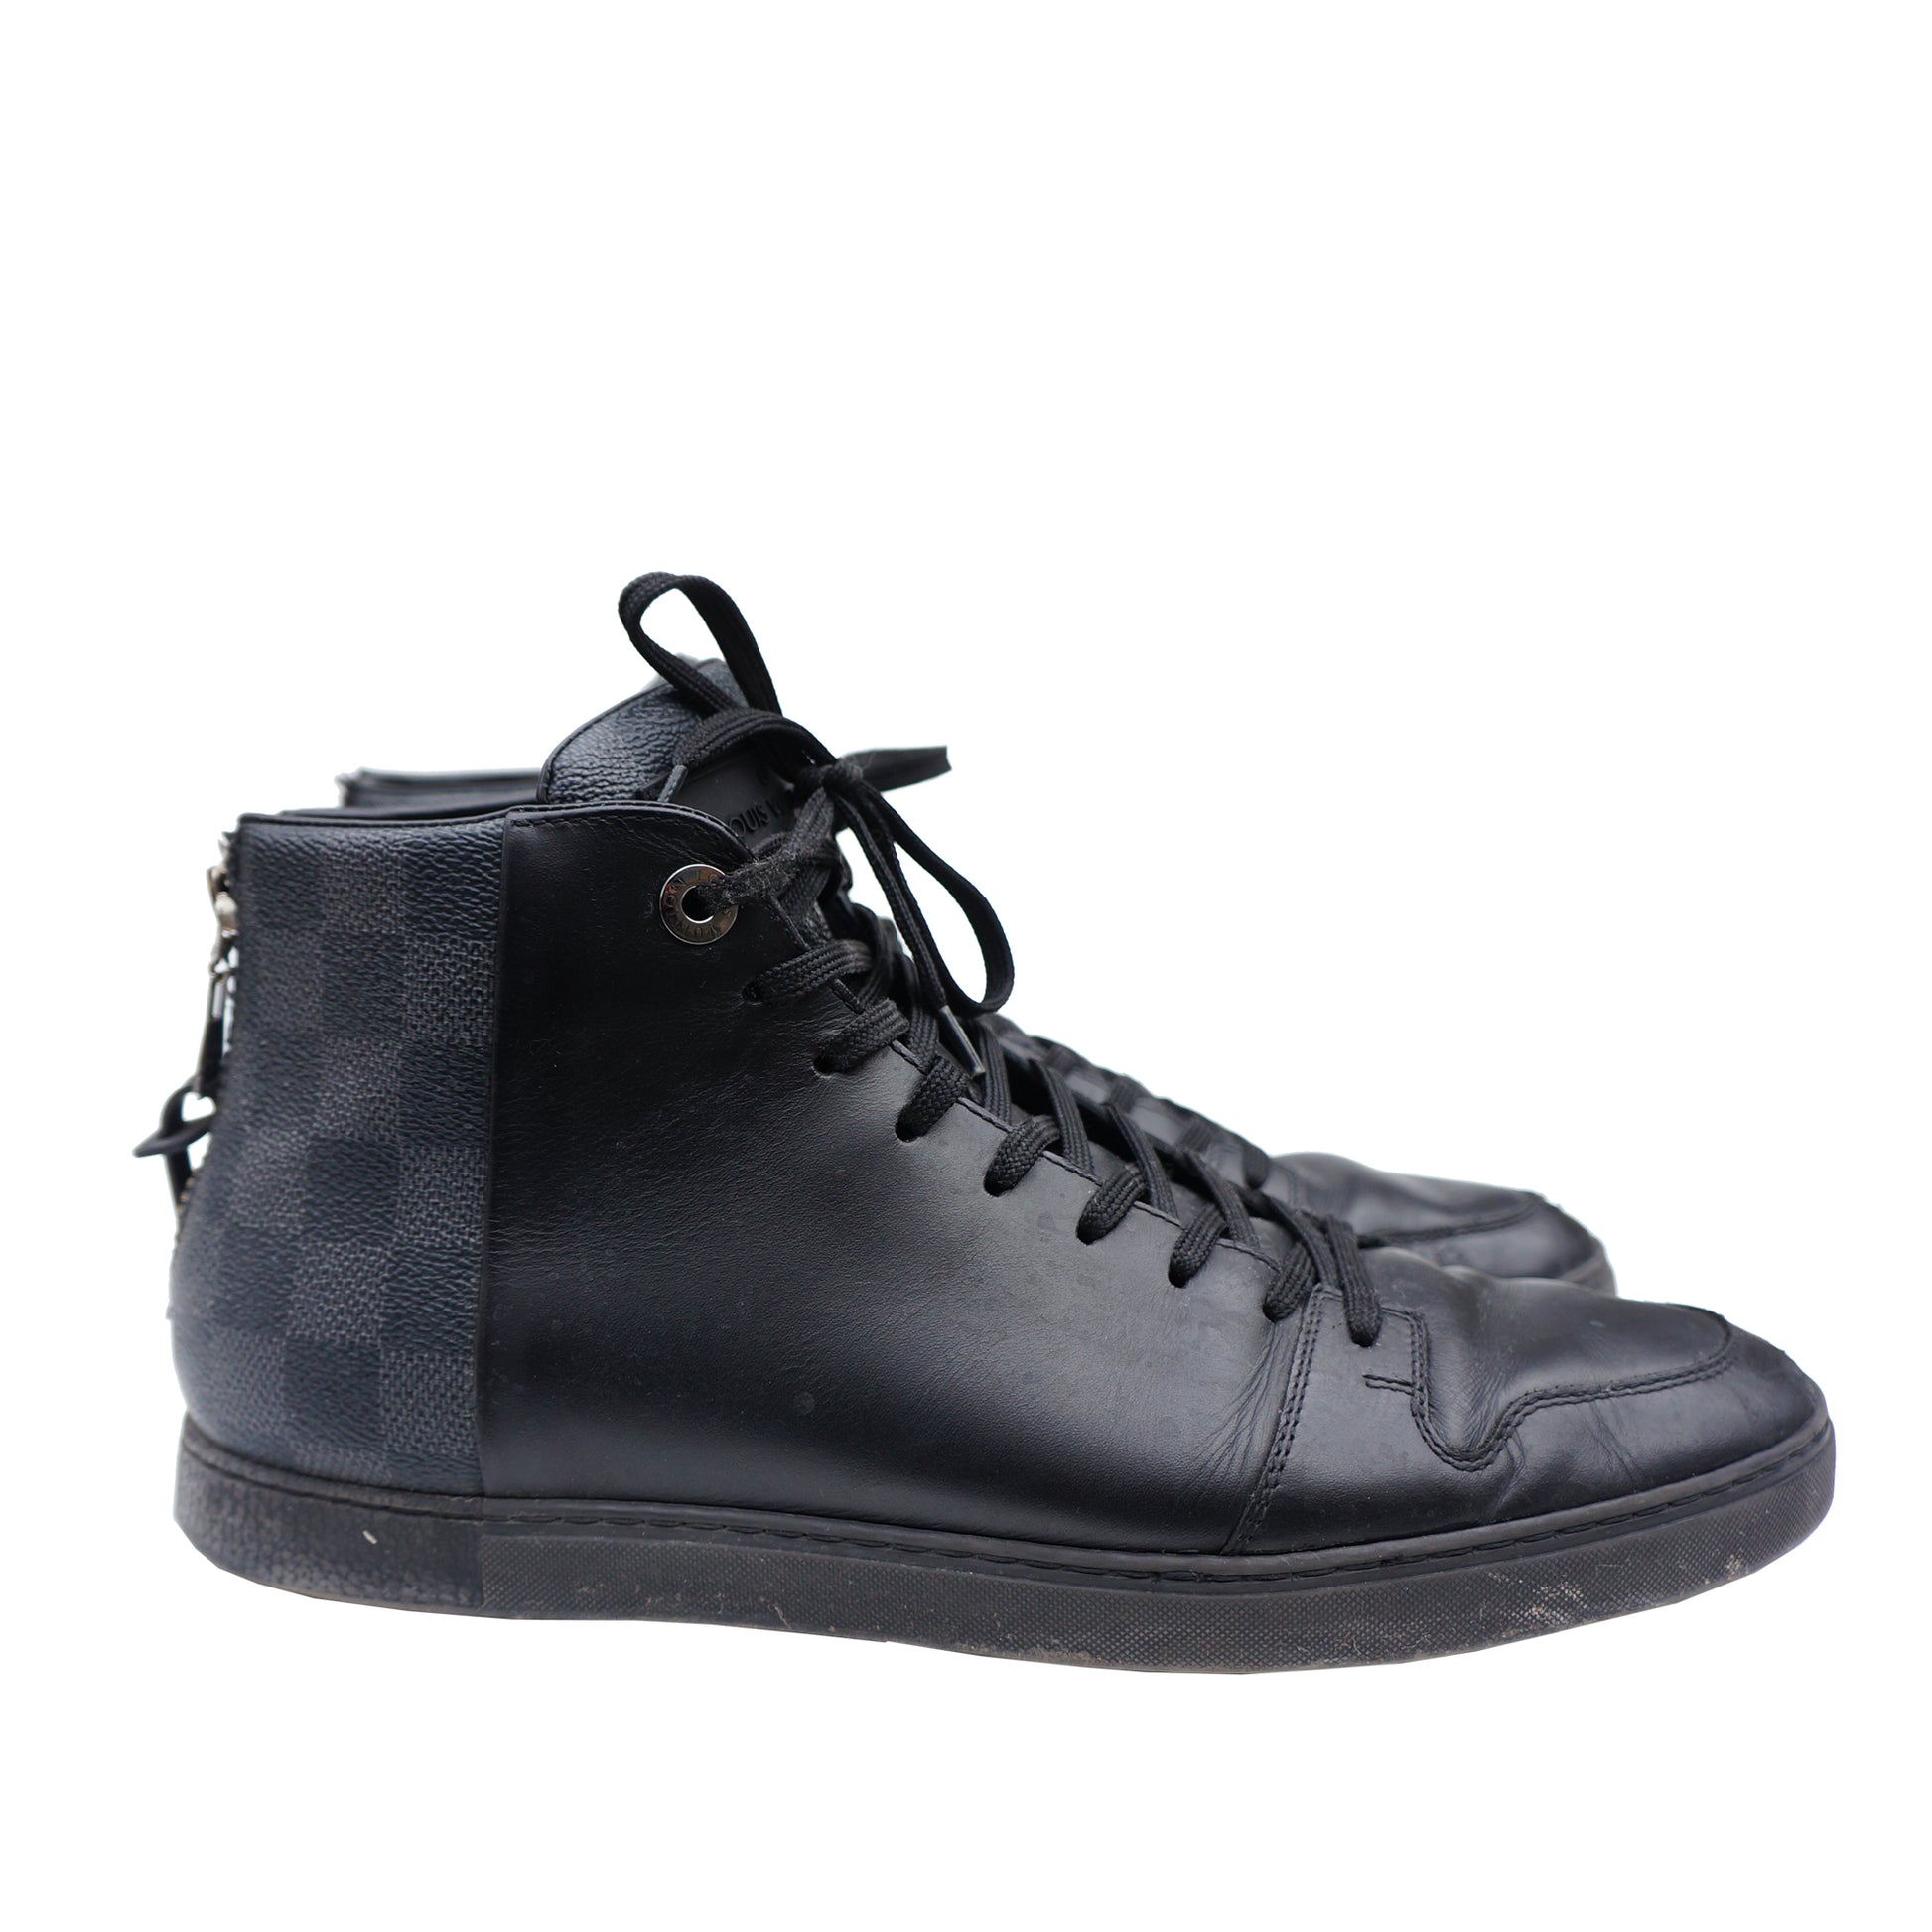 Silicon Valley Is Obsessed With the Louis Vuitton Damier High-Top Sneaker